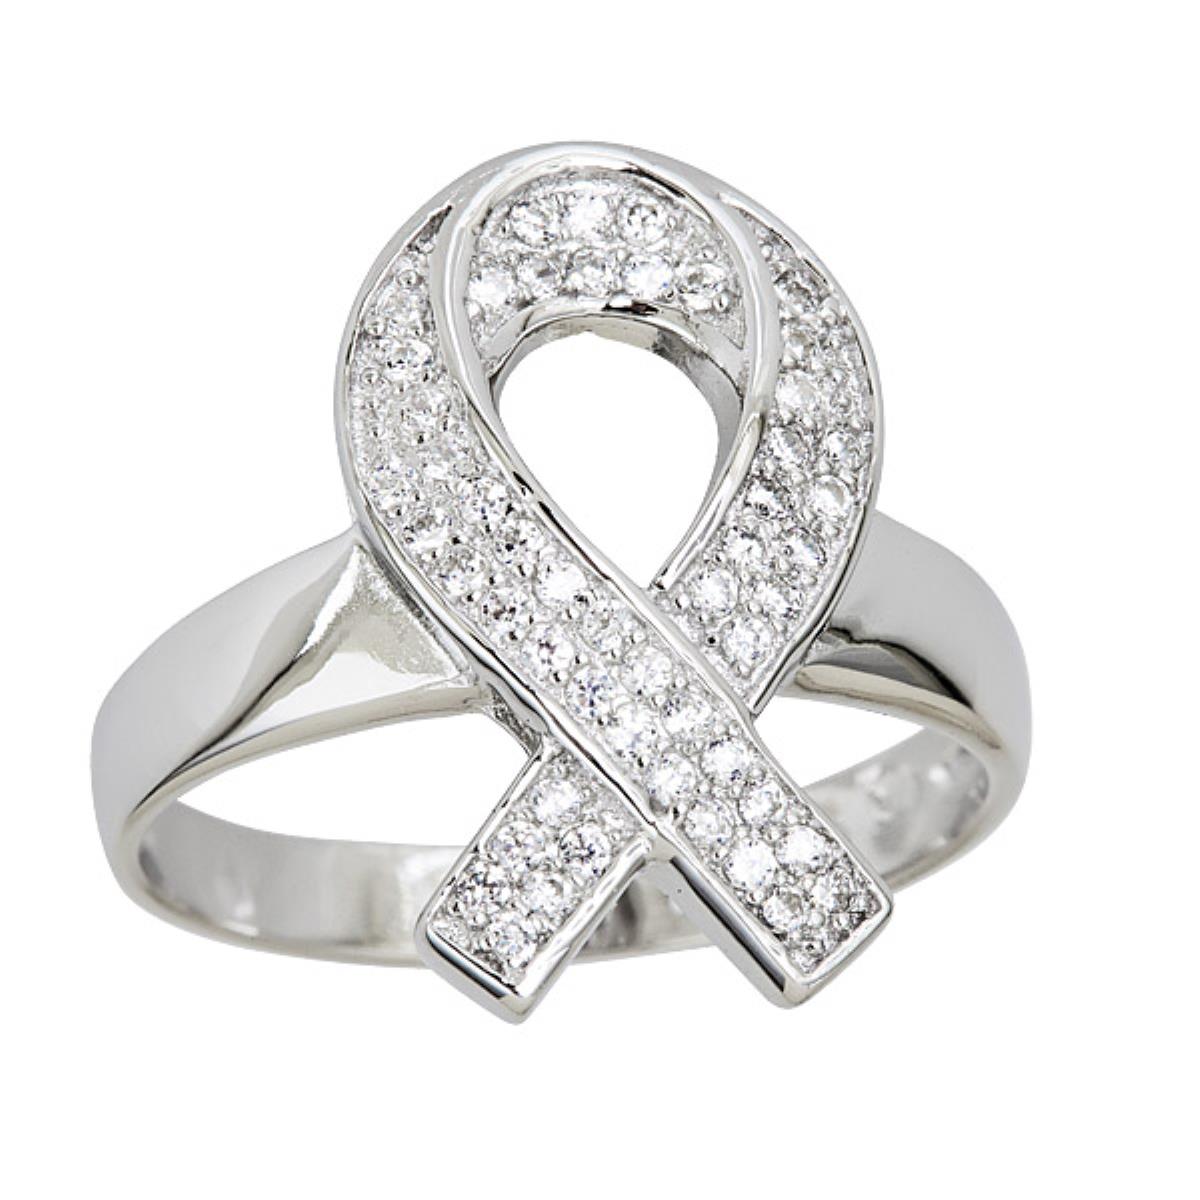 Sterling Silver Pave Ribbon Ring